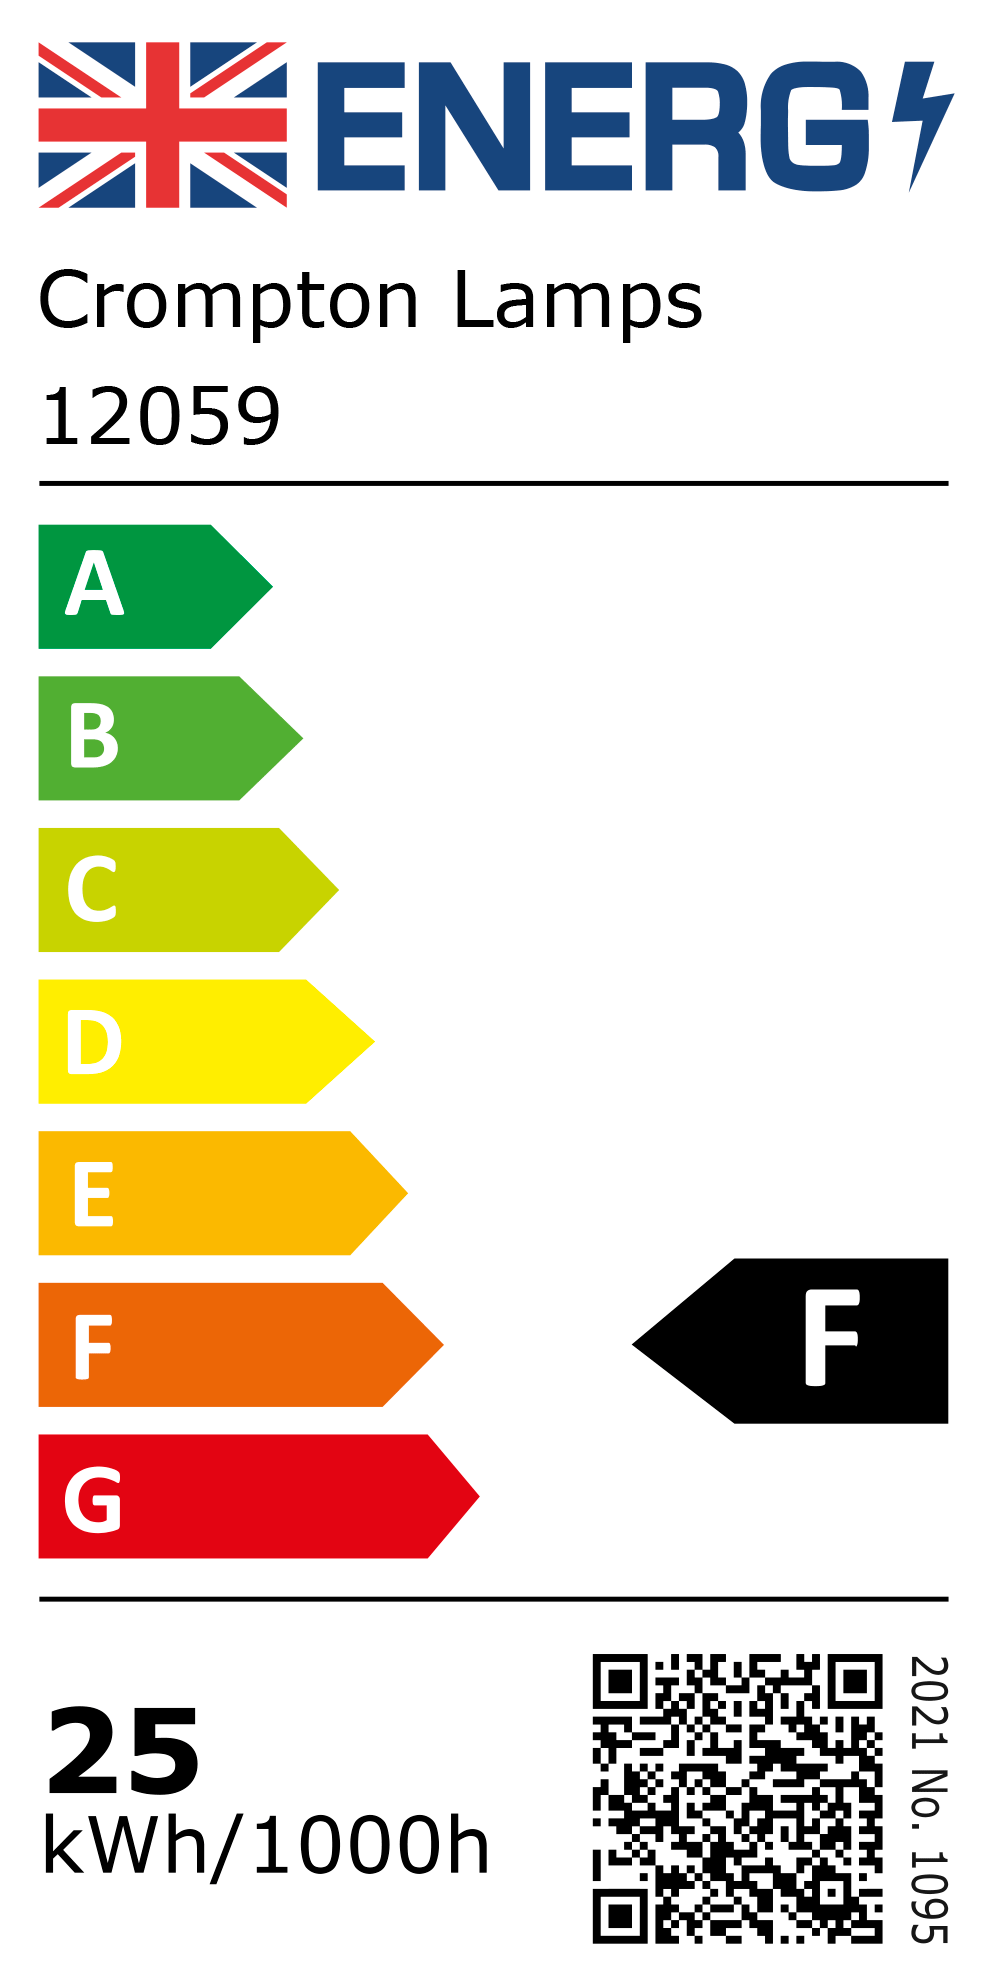 New 2021 Energy Rating Label: Stock Code 12059